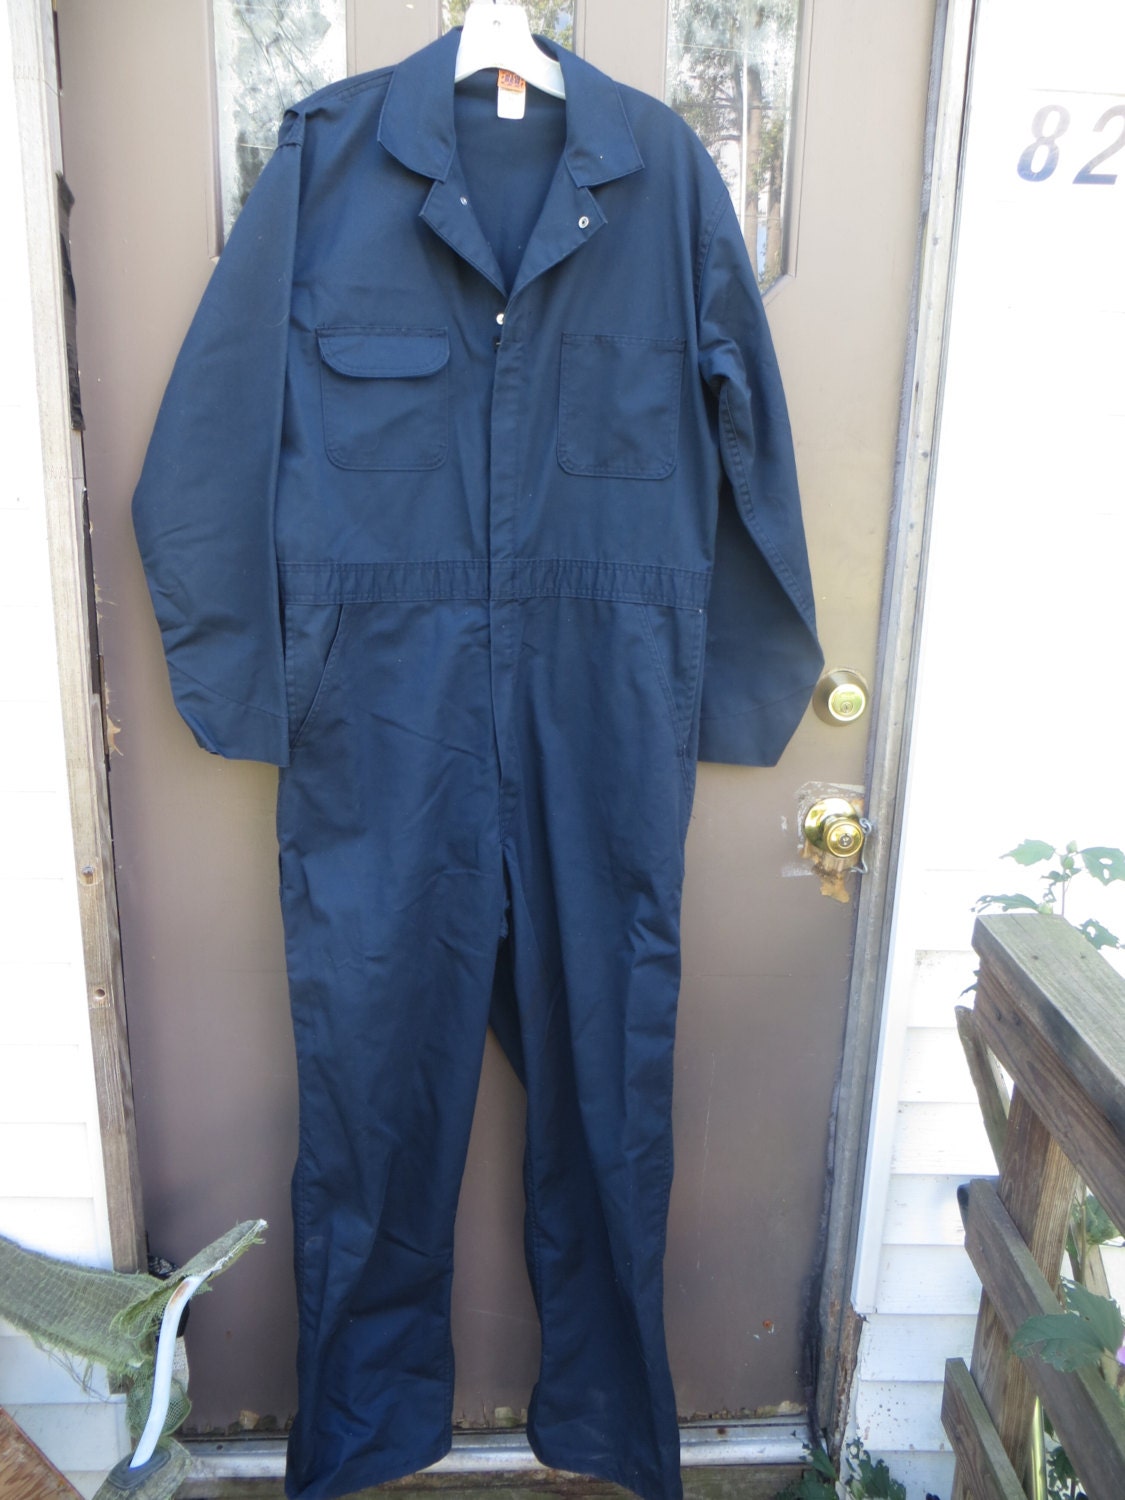 NEW WALLS NAVY BLUE COVERALLS 100% COTTON US SIZE 44 Tall